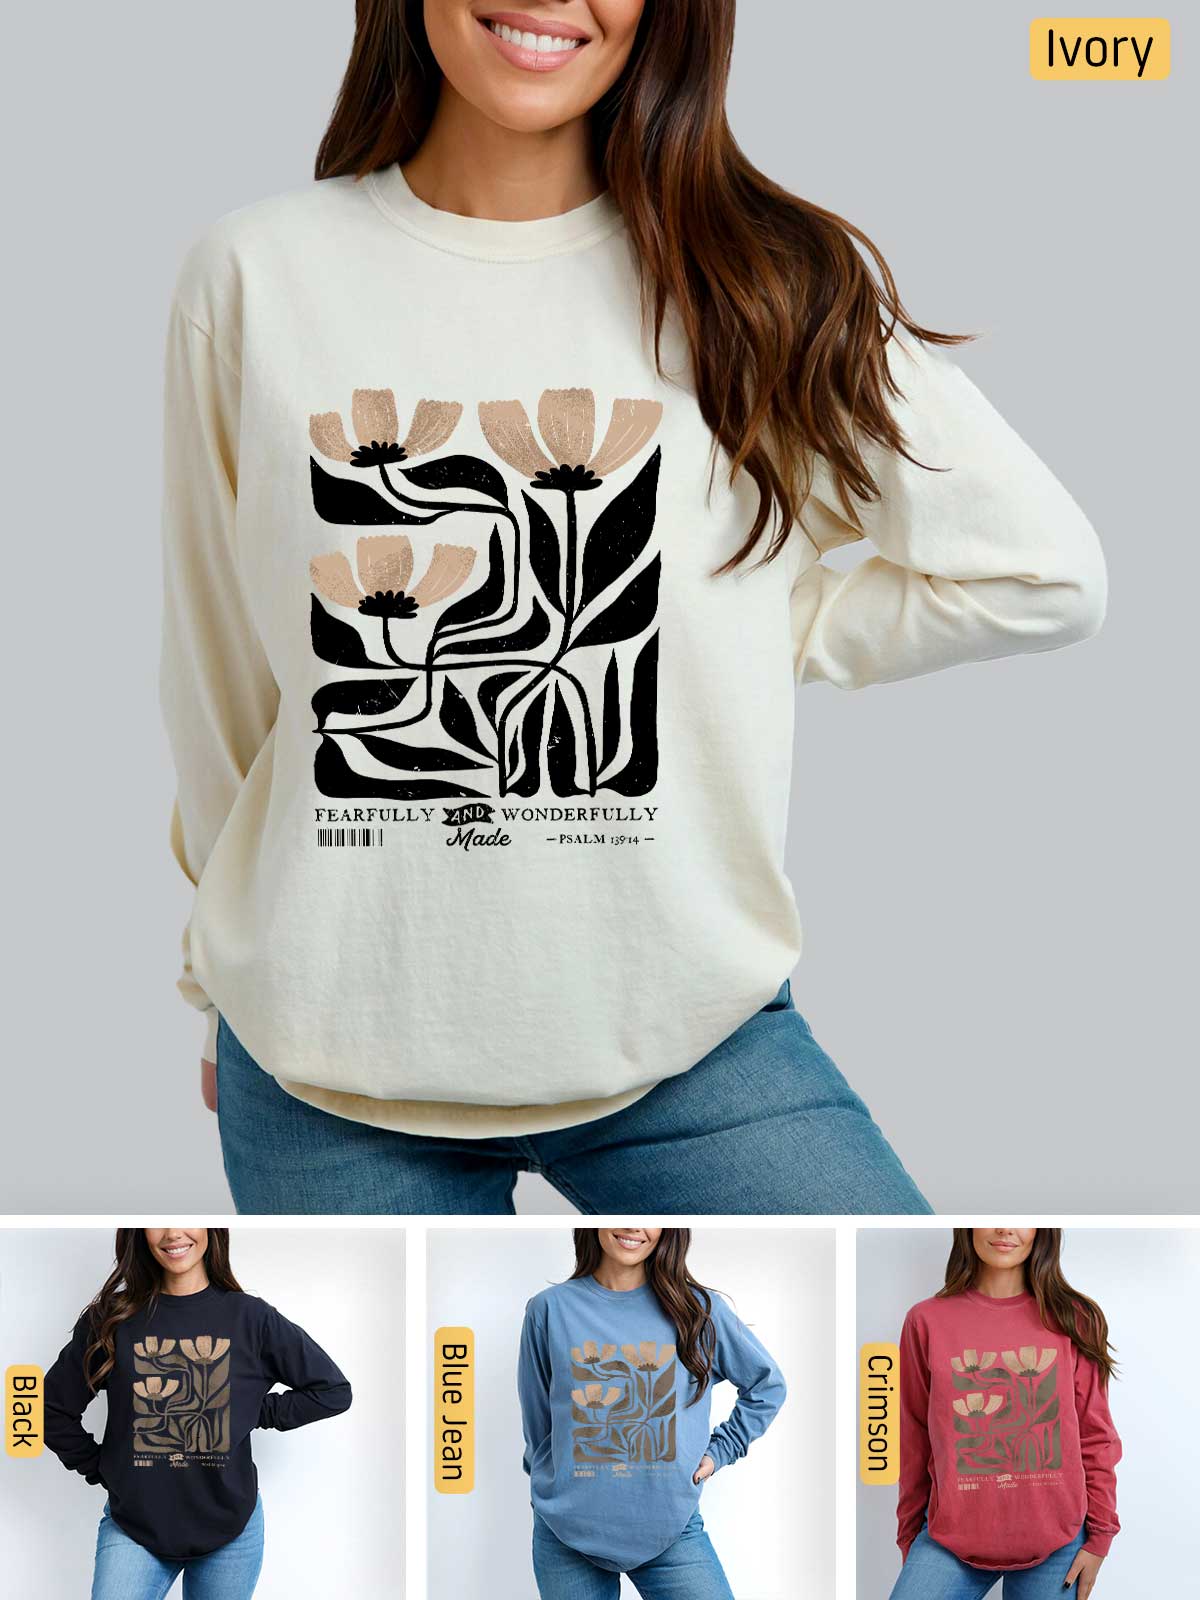 a woman wearing a sweatshirt with a graphic on it